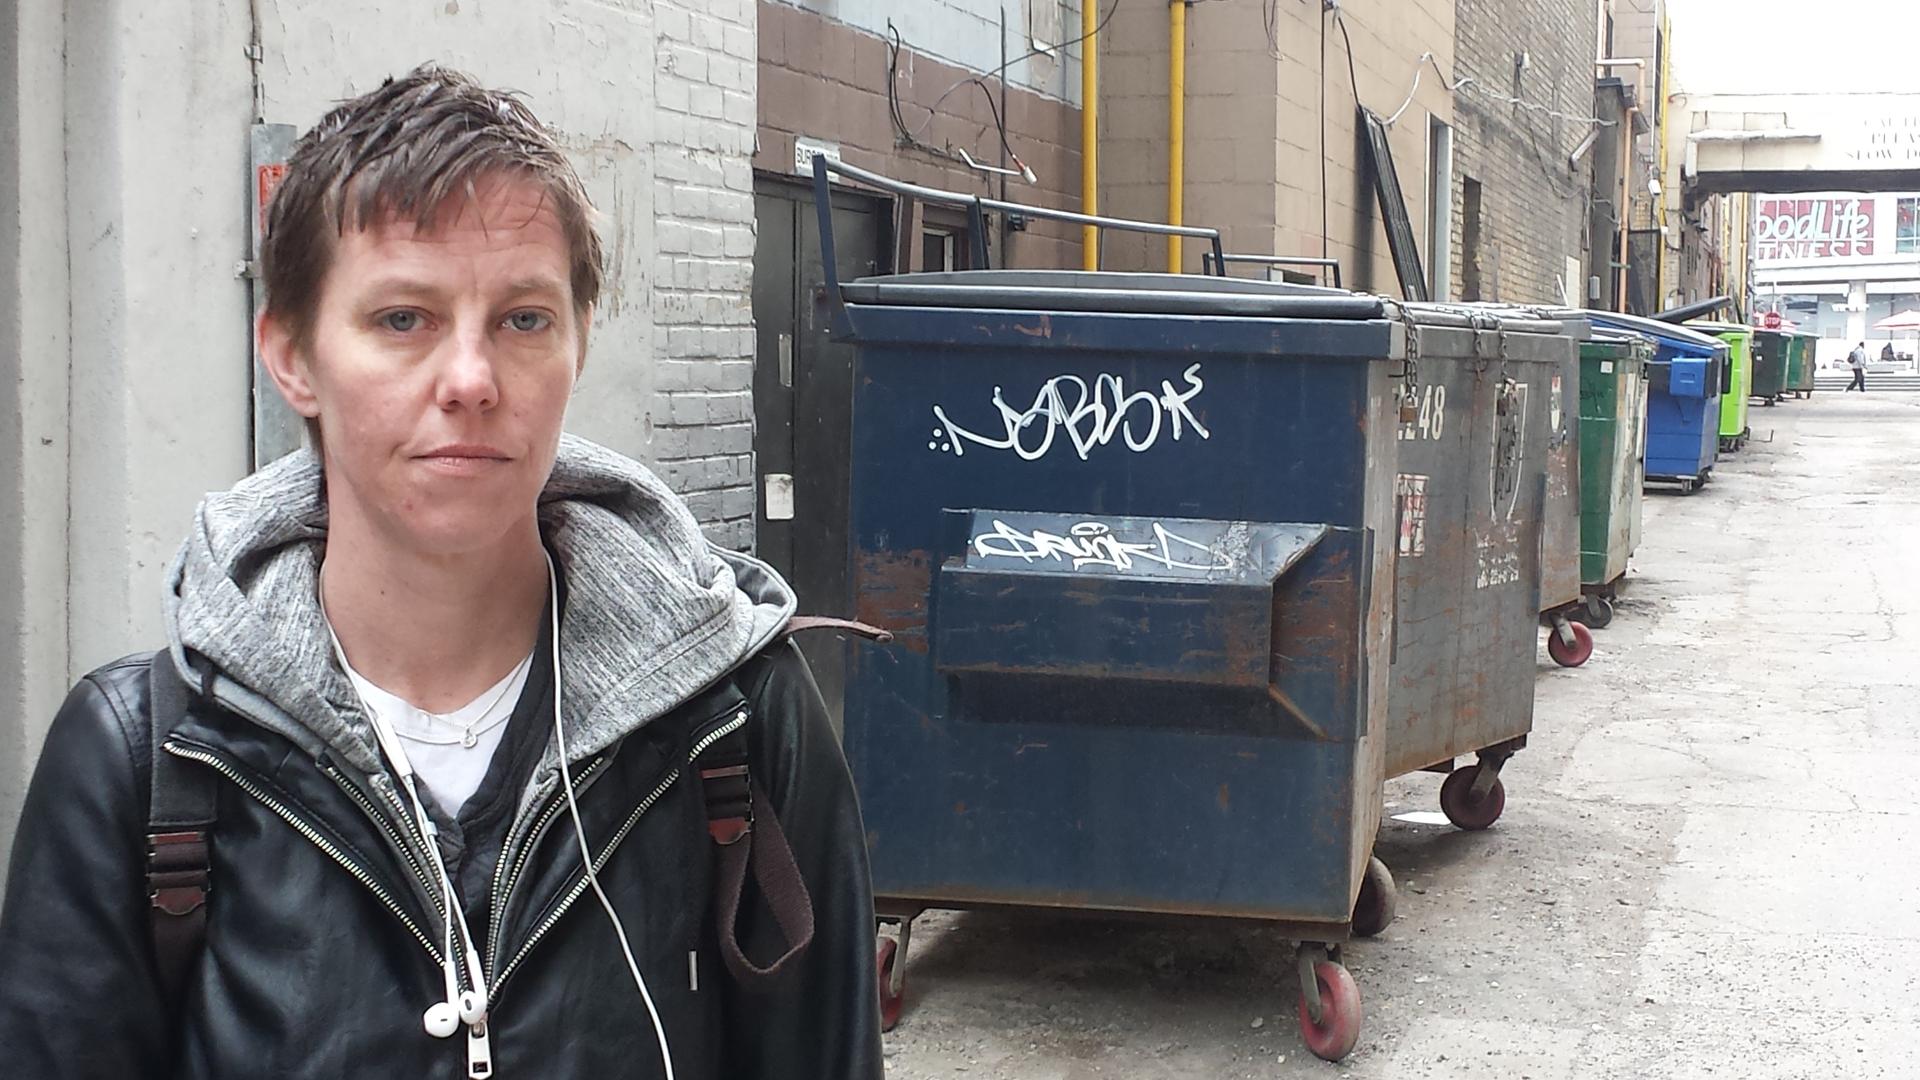 Amy Wright used to shoot up in alleys like this in downtown Toronto. Now she's helping the city design its safe injection sites.